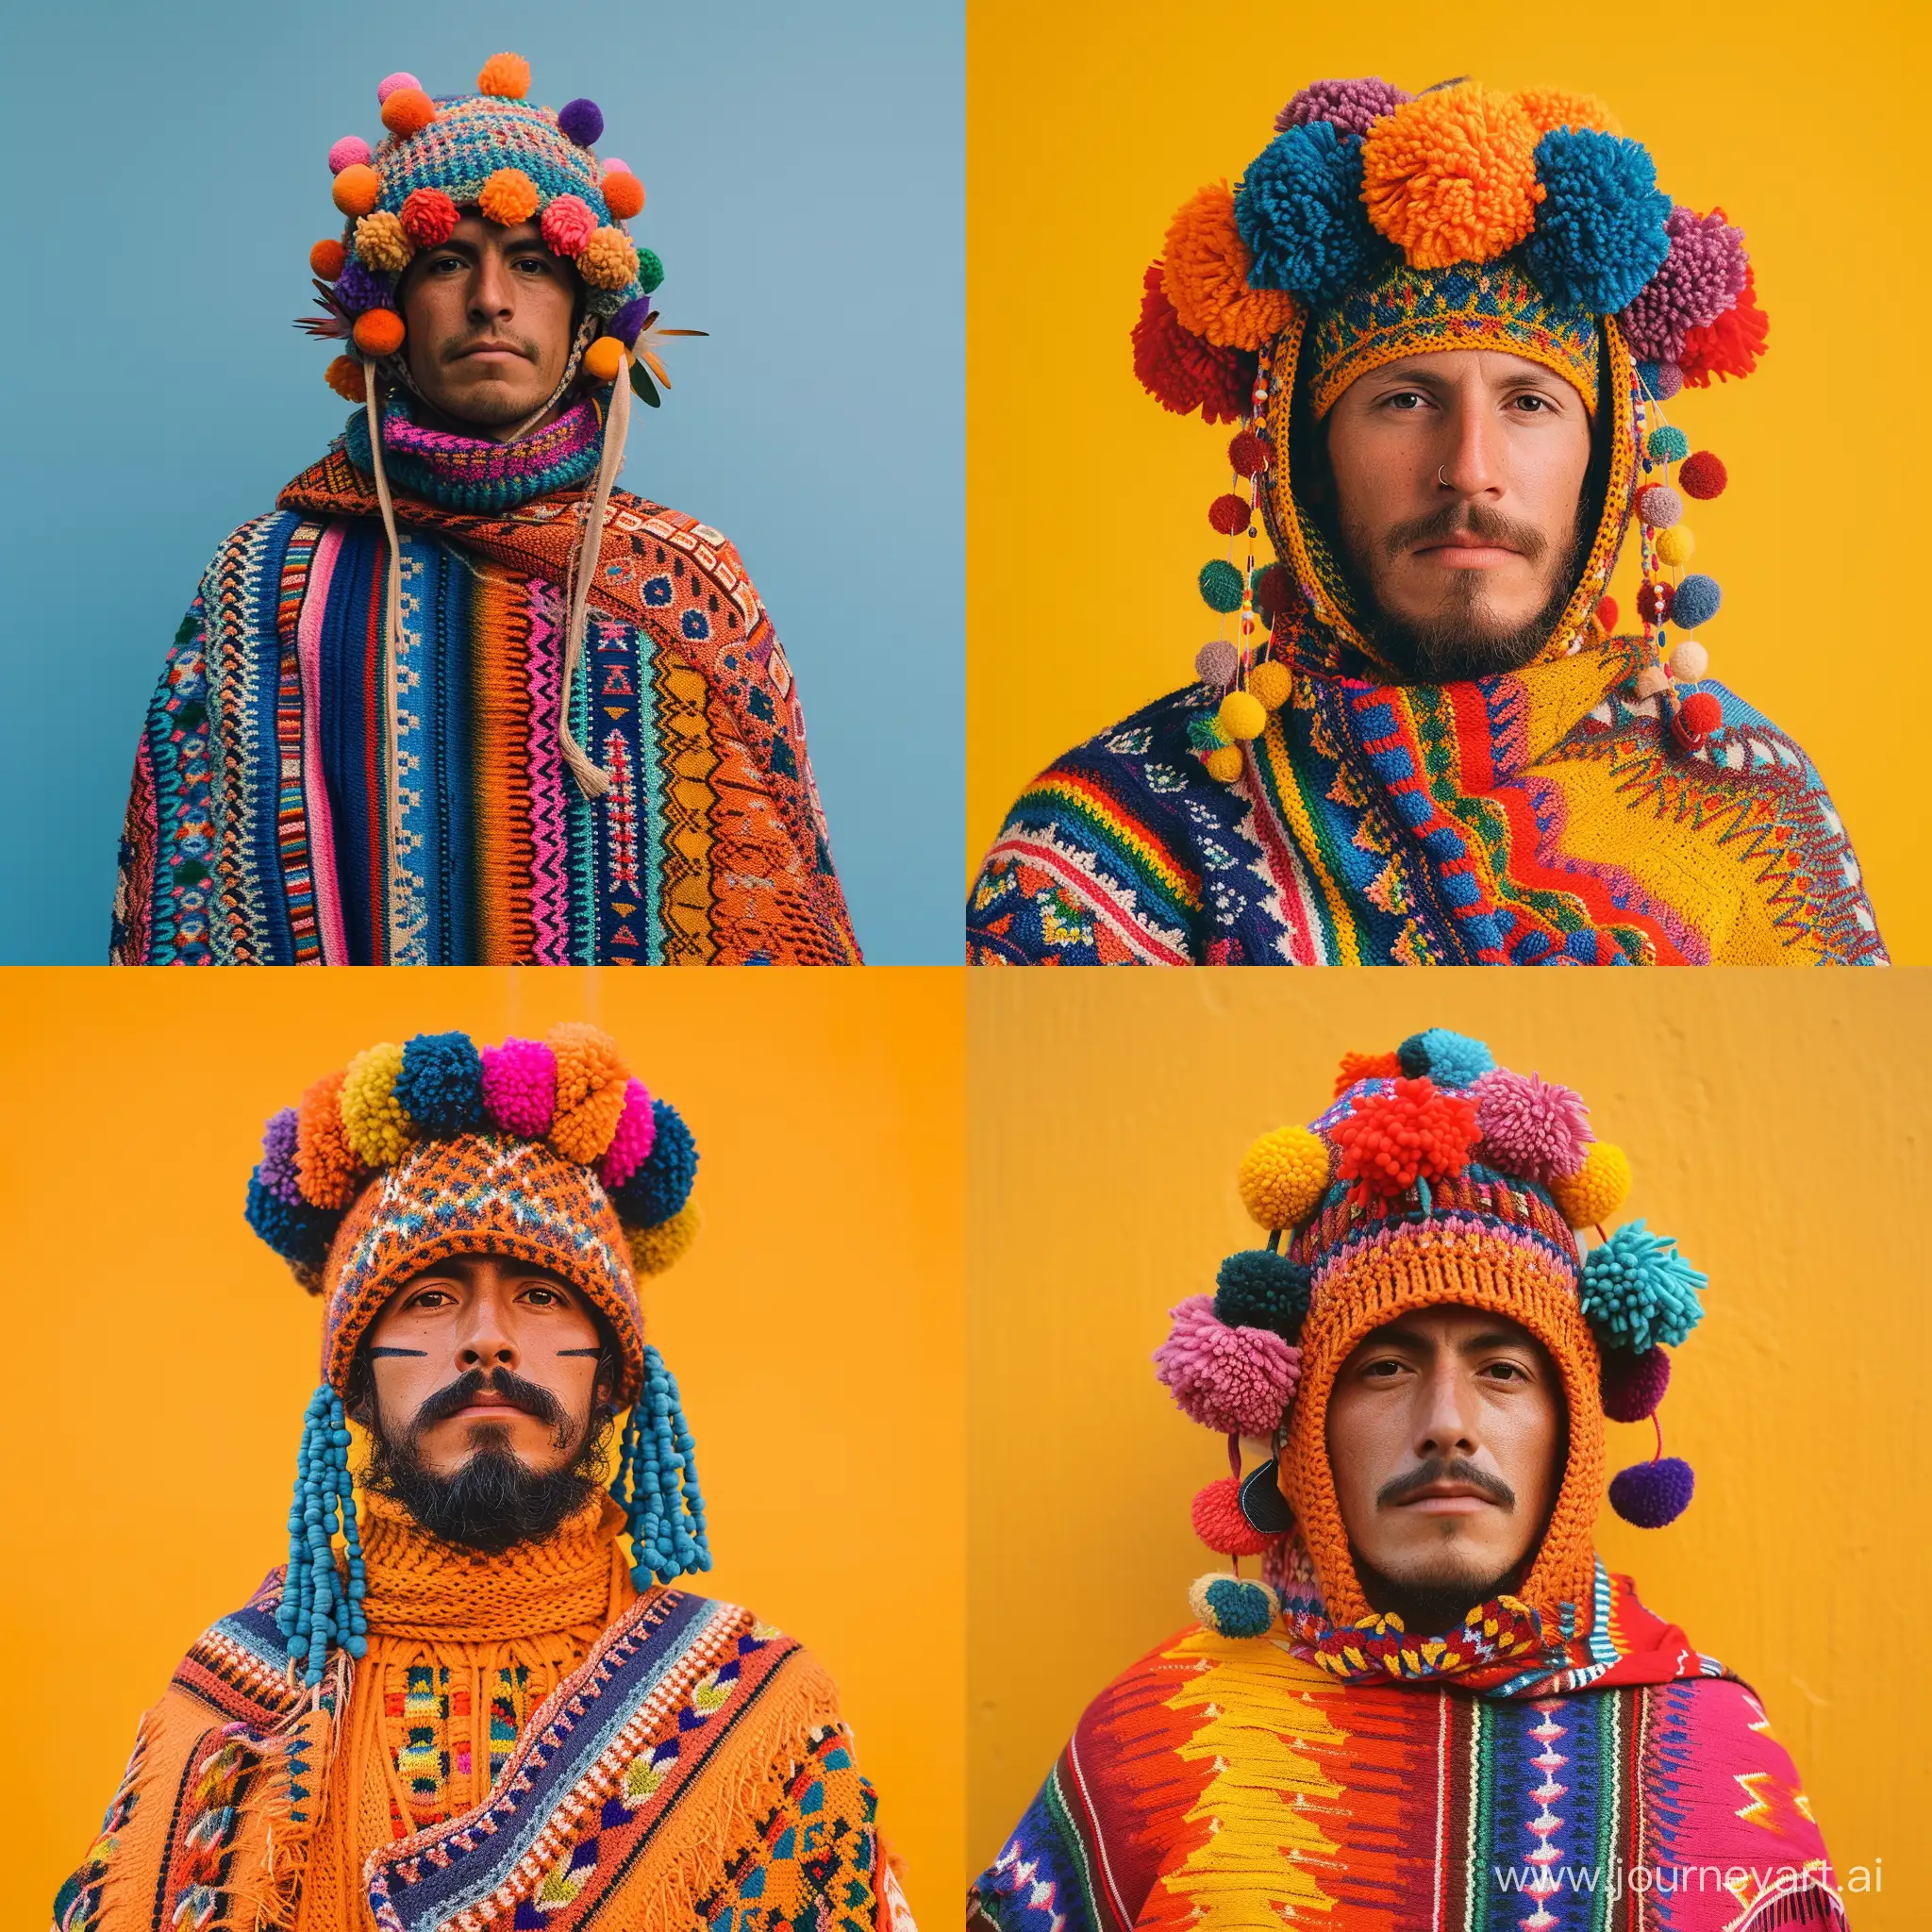 Man-in-Knitted-Helmet-and-Pompons-Wearing-Colorful-Mexican-Traditional-Clothing-on-Kodak-Minimalism-Flat-Background